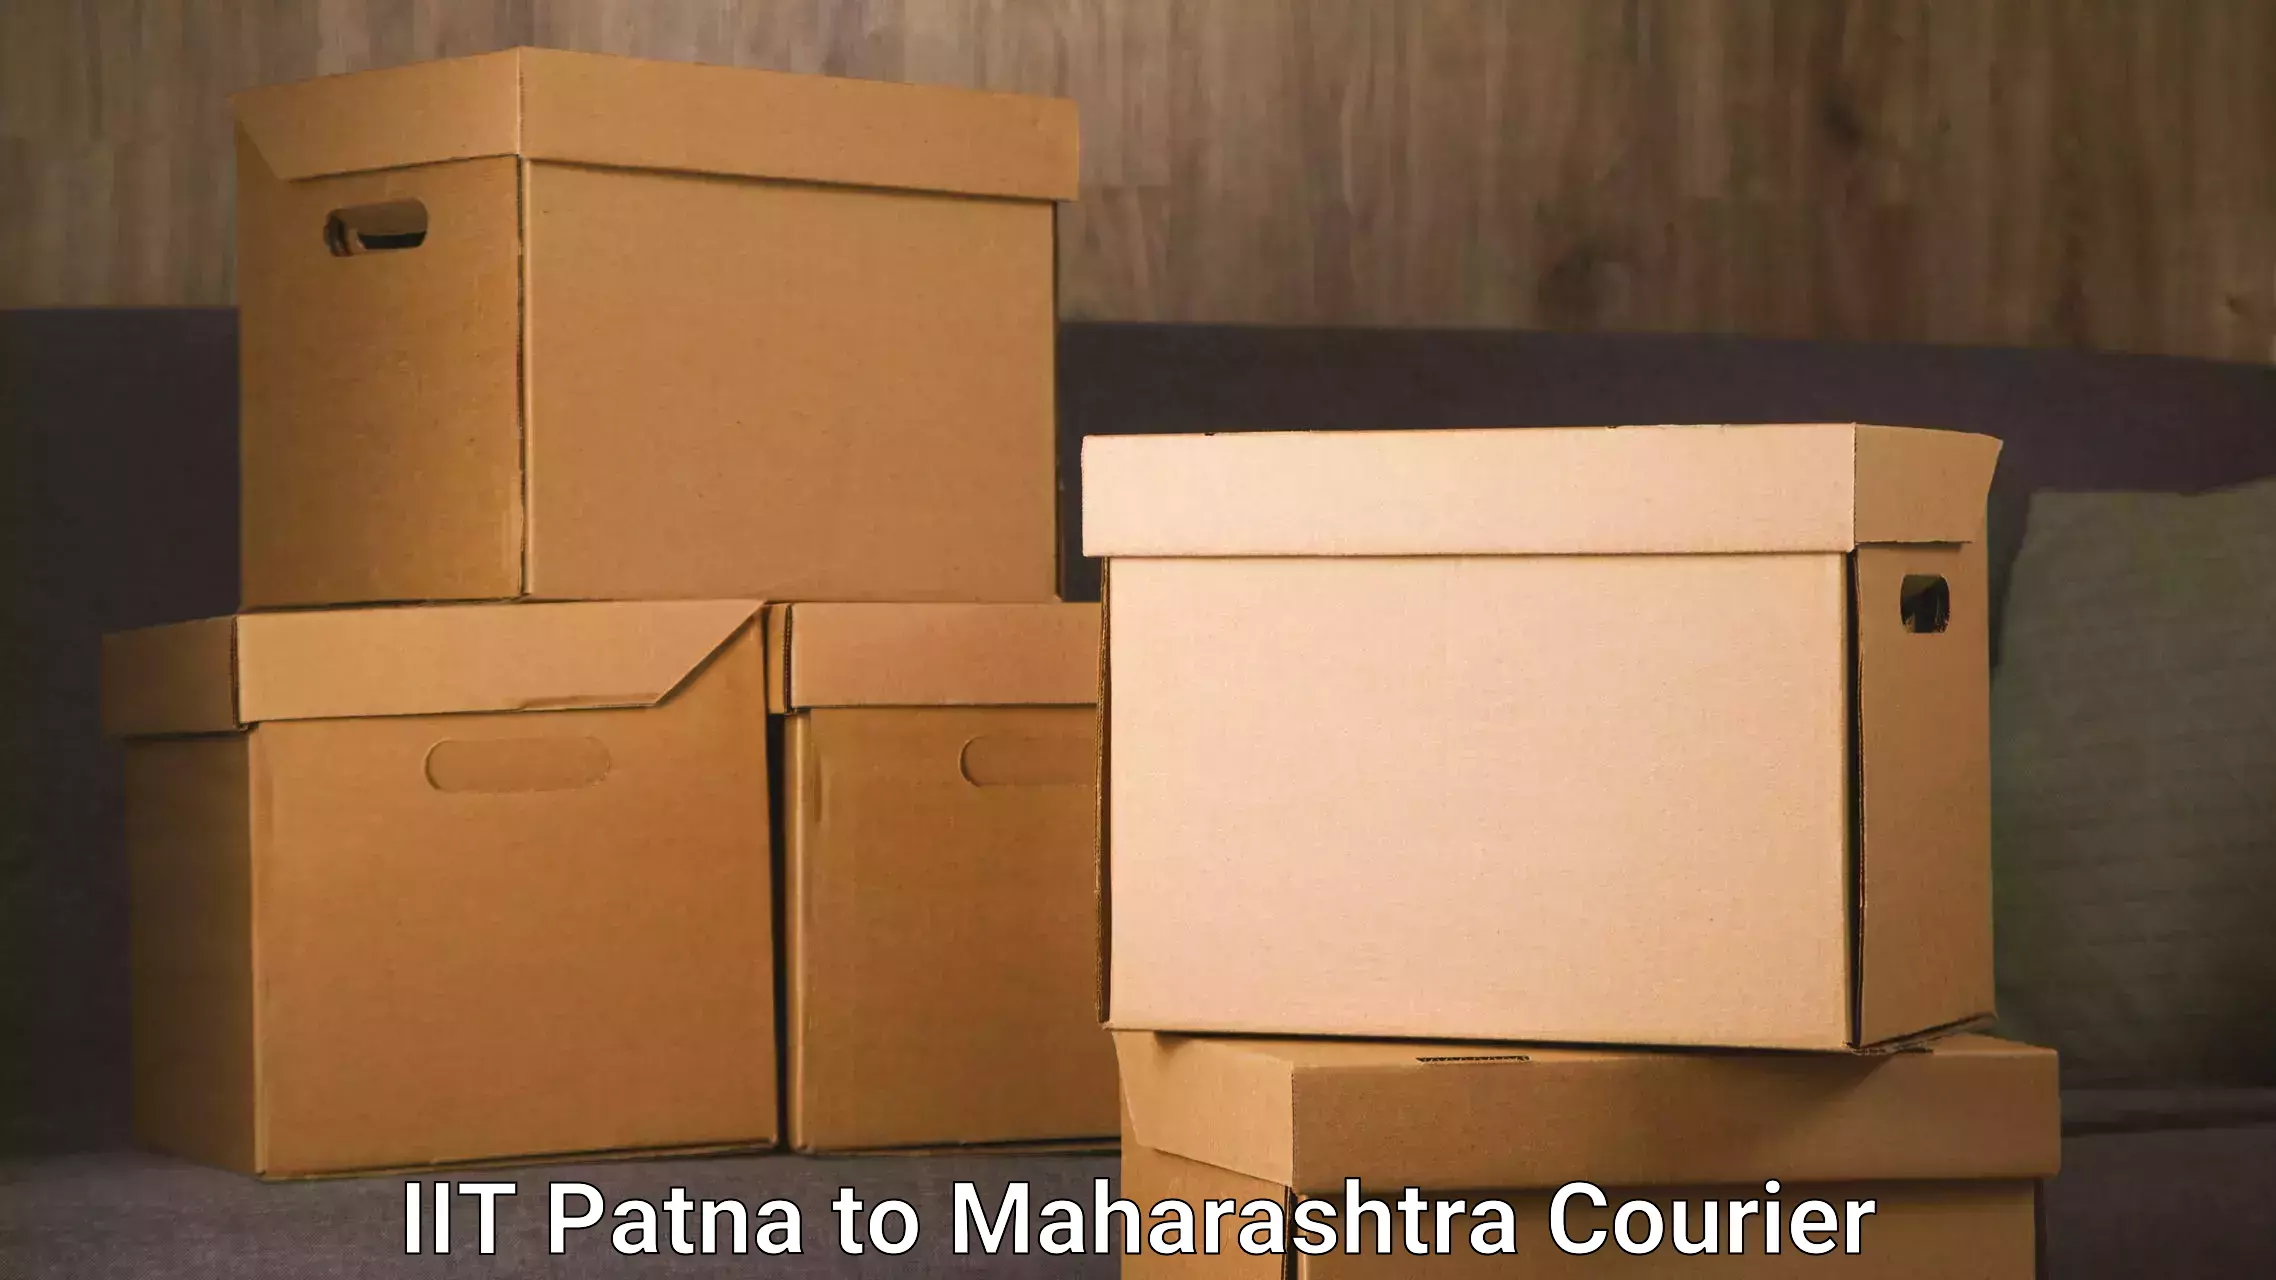 Furniture transport company IIT Patna to SVKMs Narsee Monjee Institute of Management Studies Mumbai